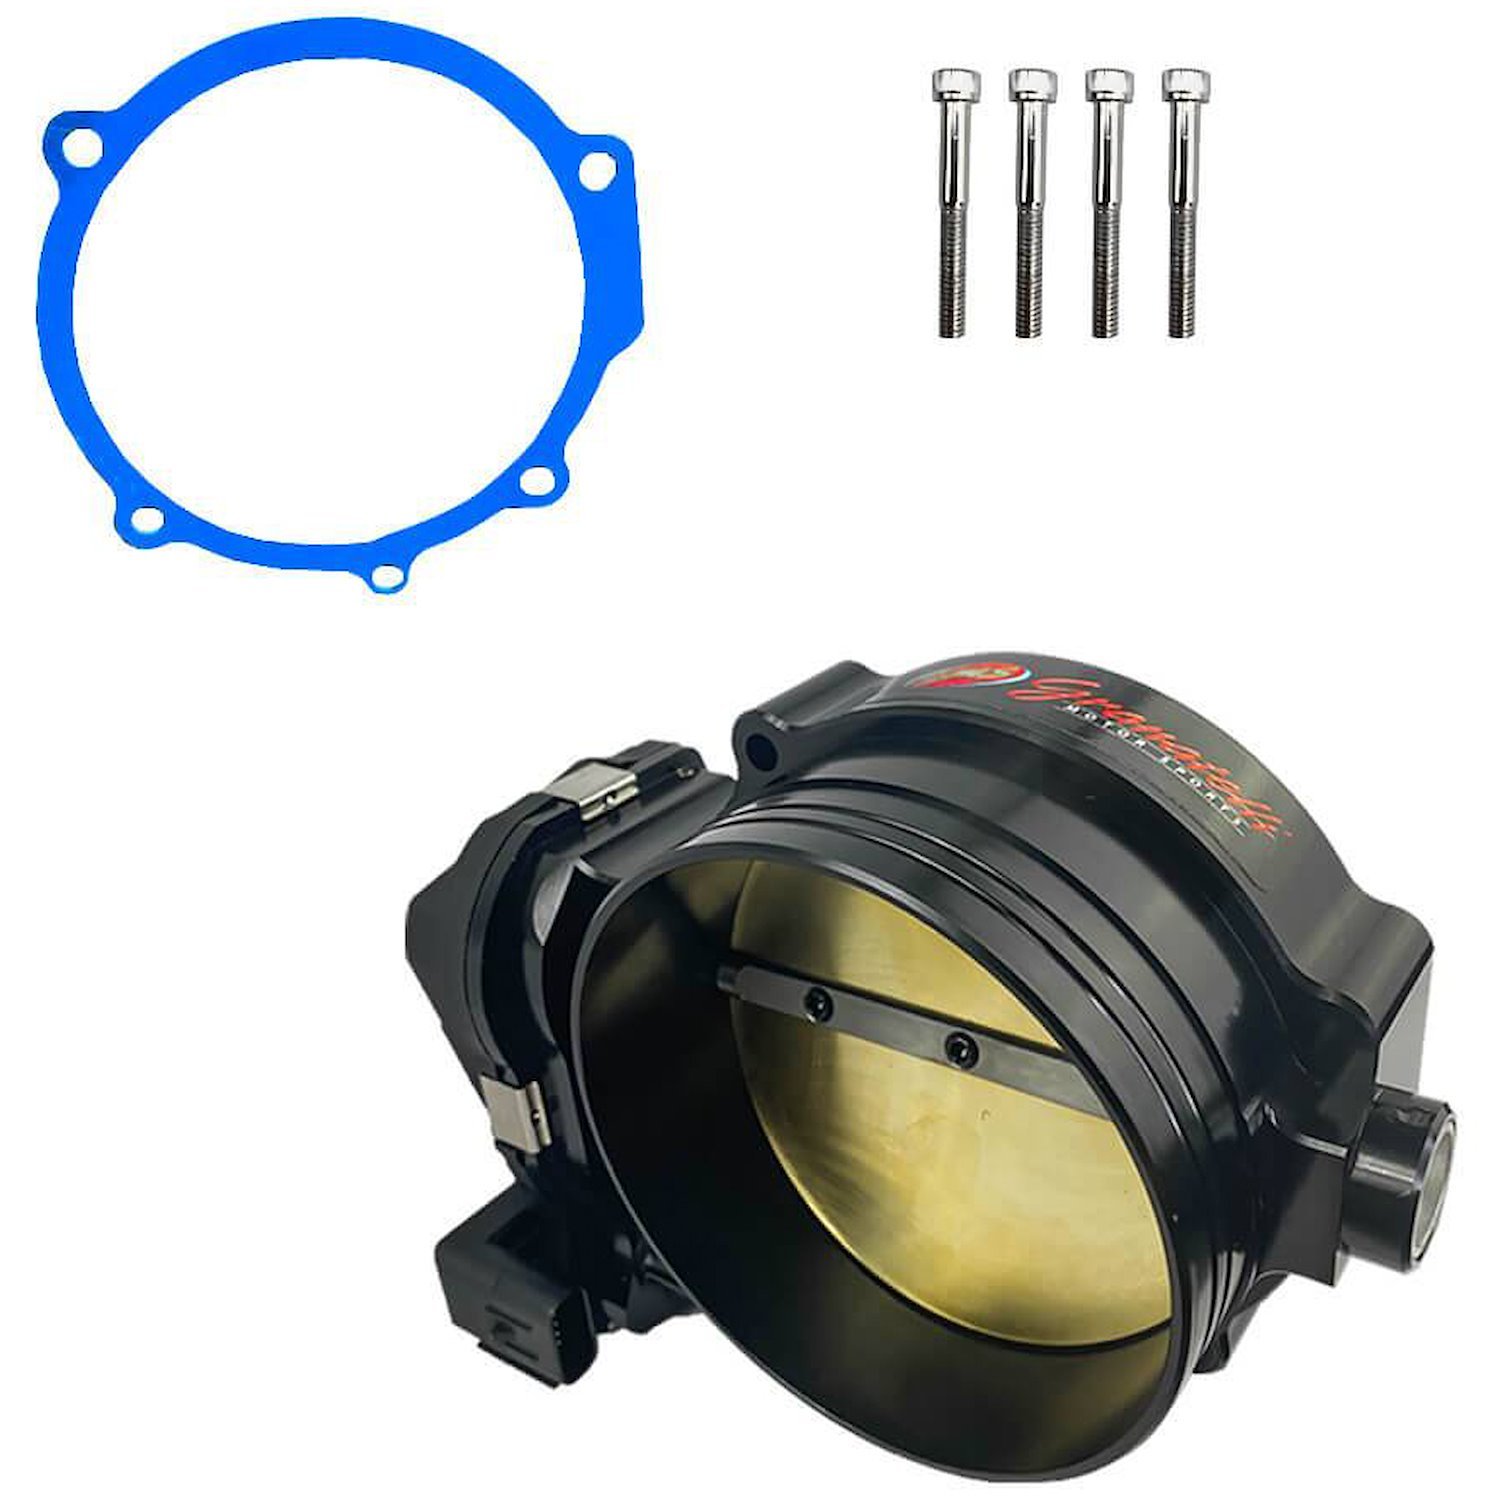 Race Drive-By-Wire 105 mm Throttle Body for Dodge